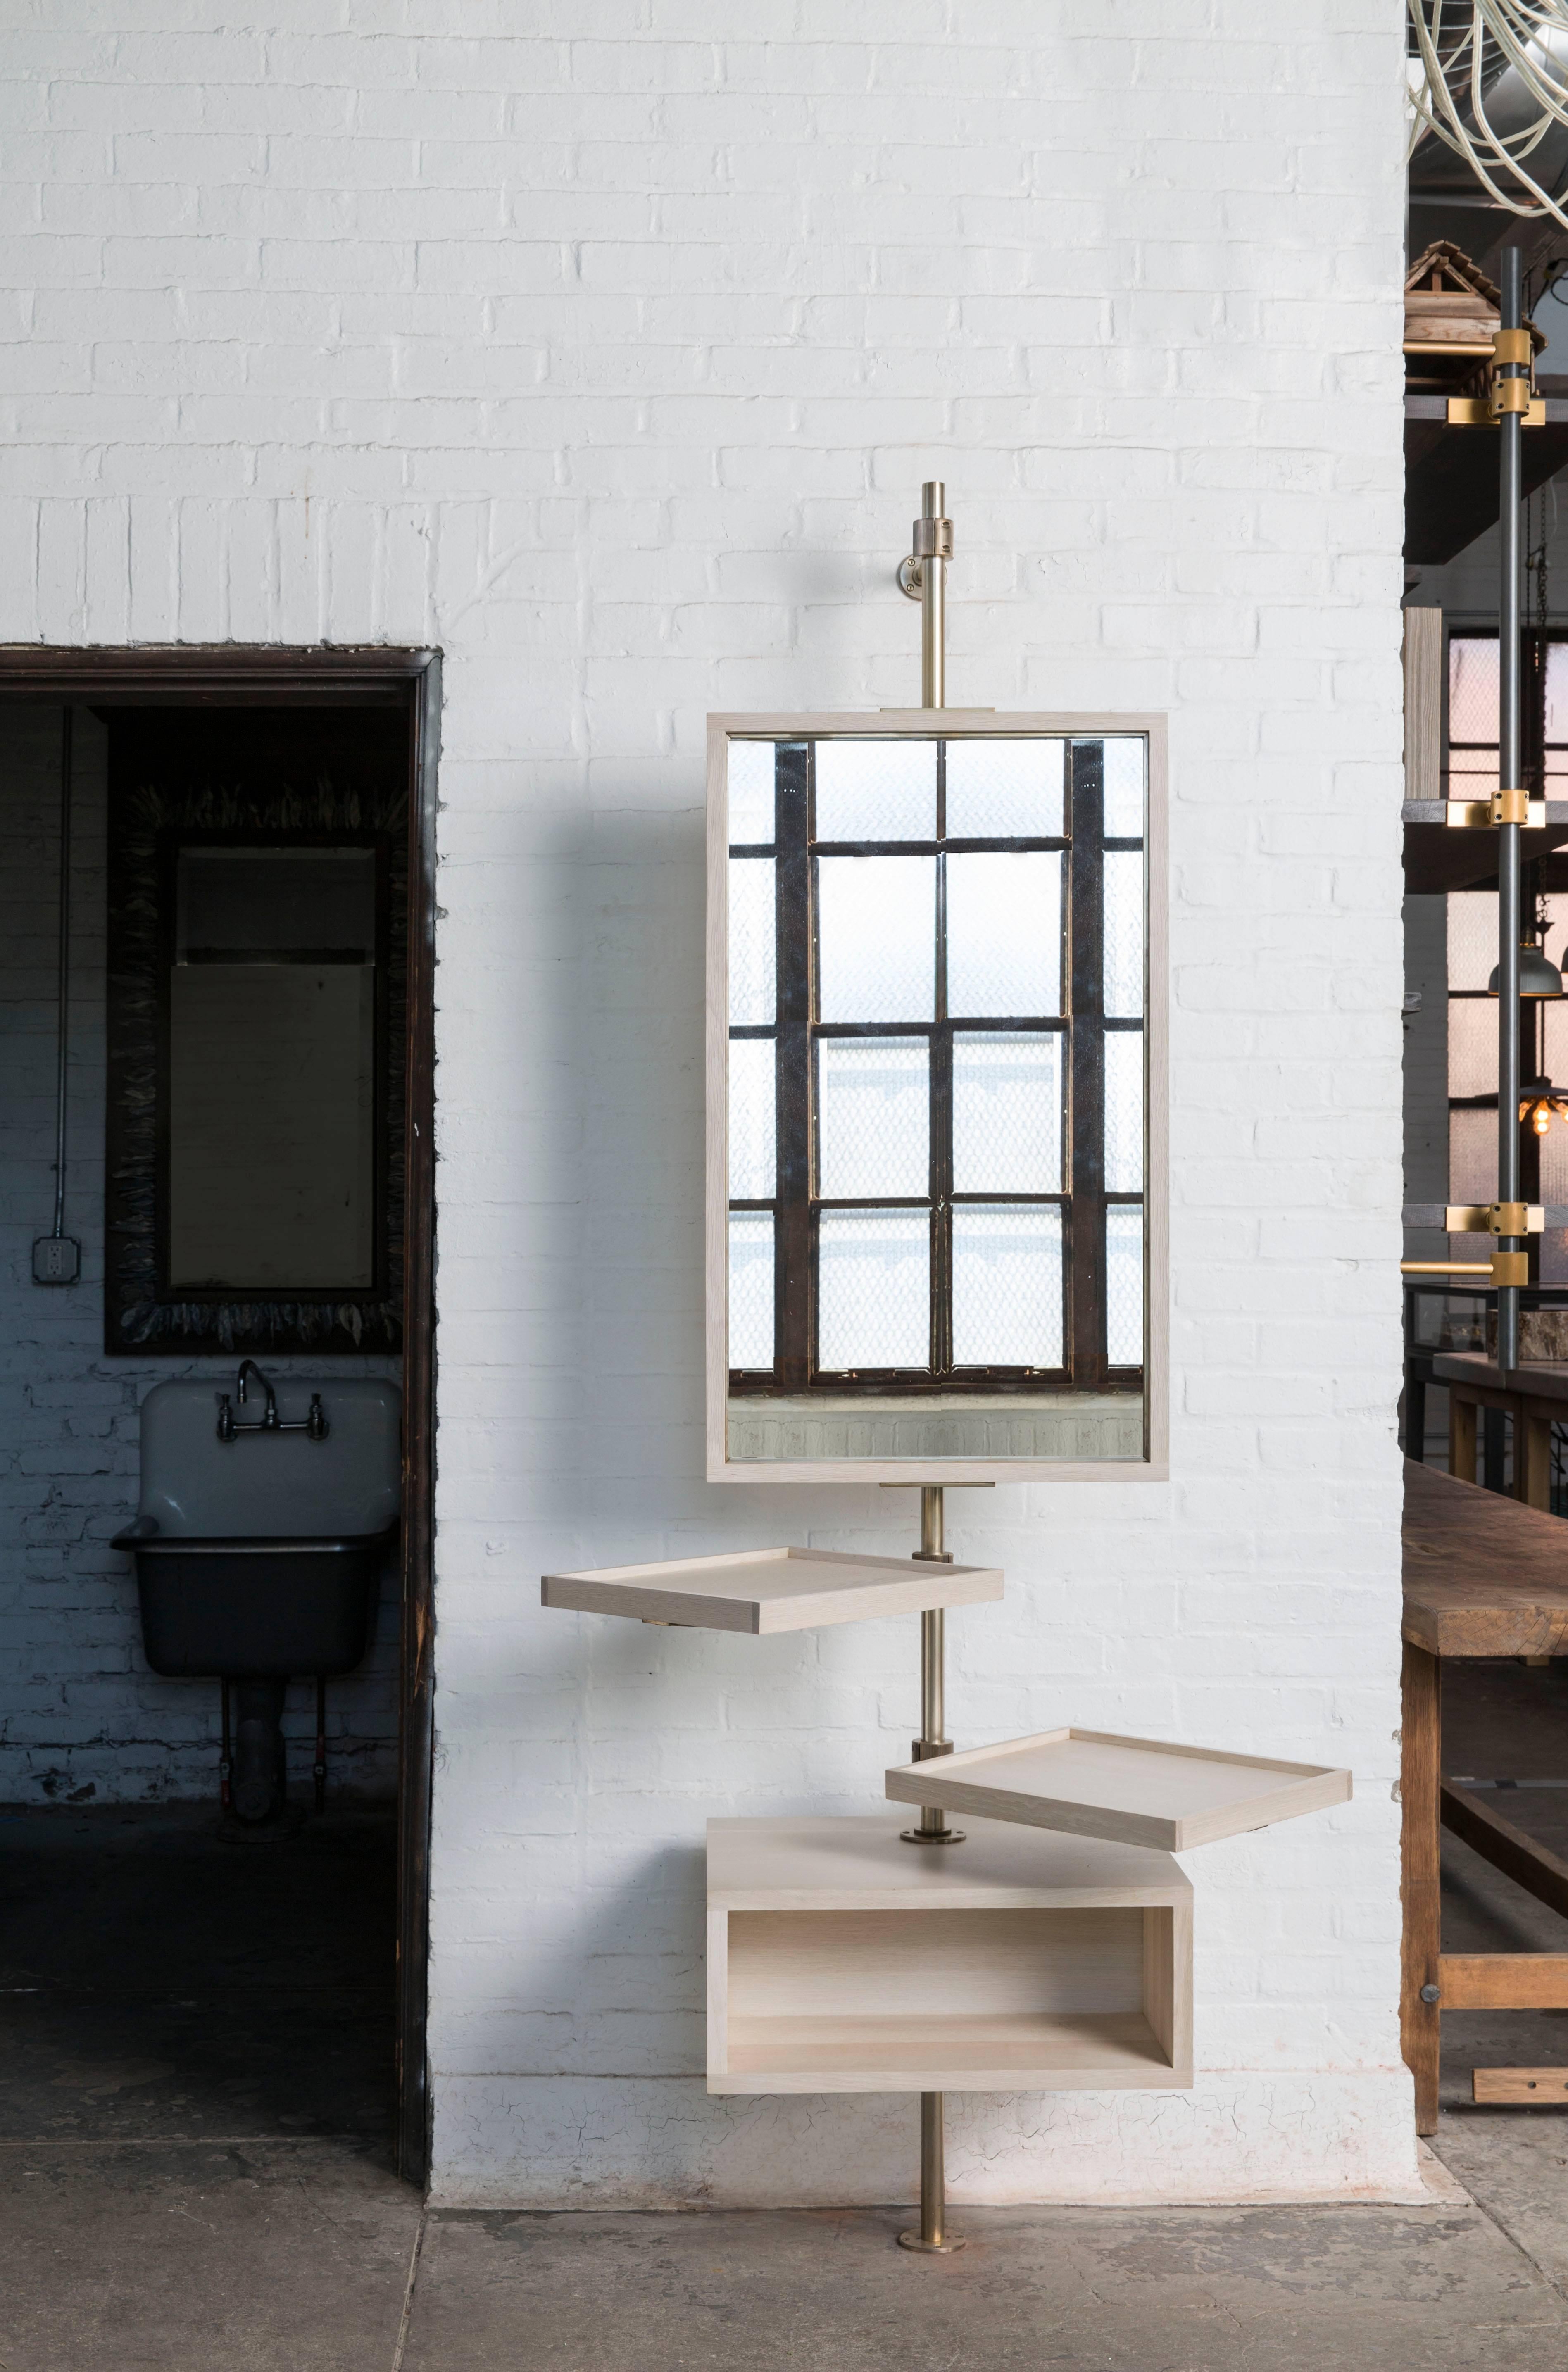 Amuneal’s loft system uses a series of custom fittings, machined from solid brass, that allow each component to be easily reconfigured around a single post. The metal components on this Single Post Loft unit with Mirror and Console are all